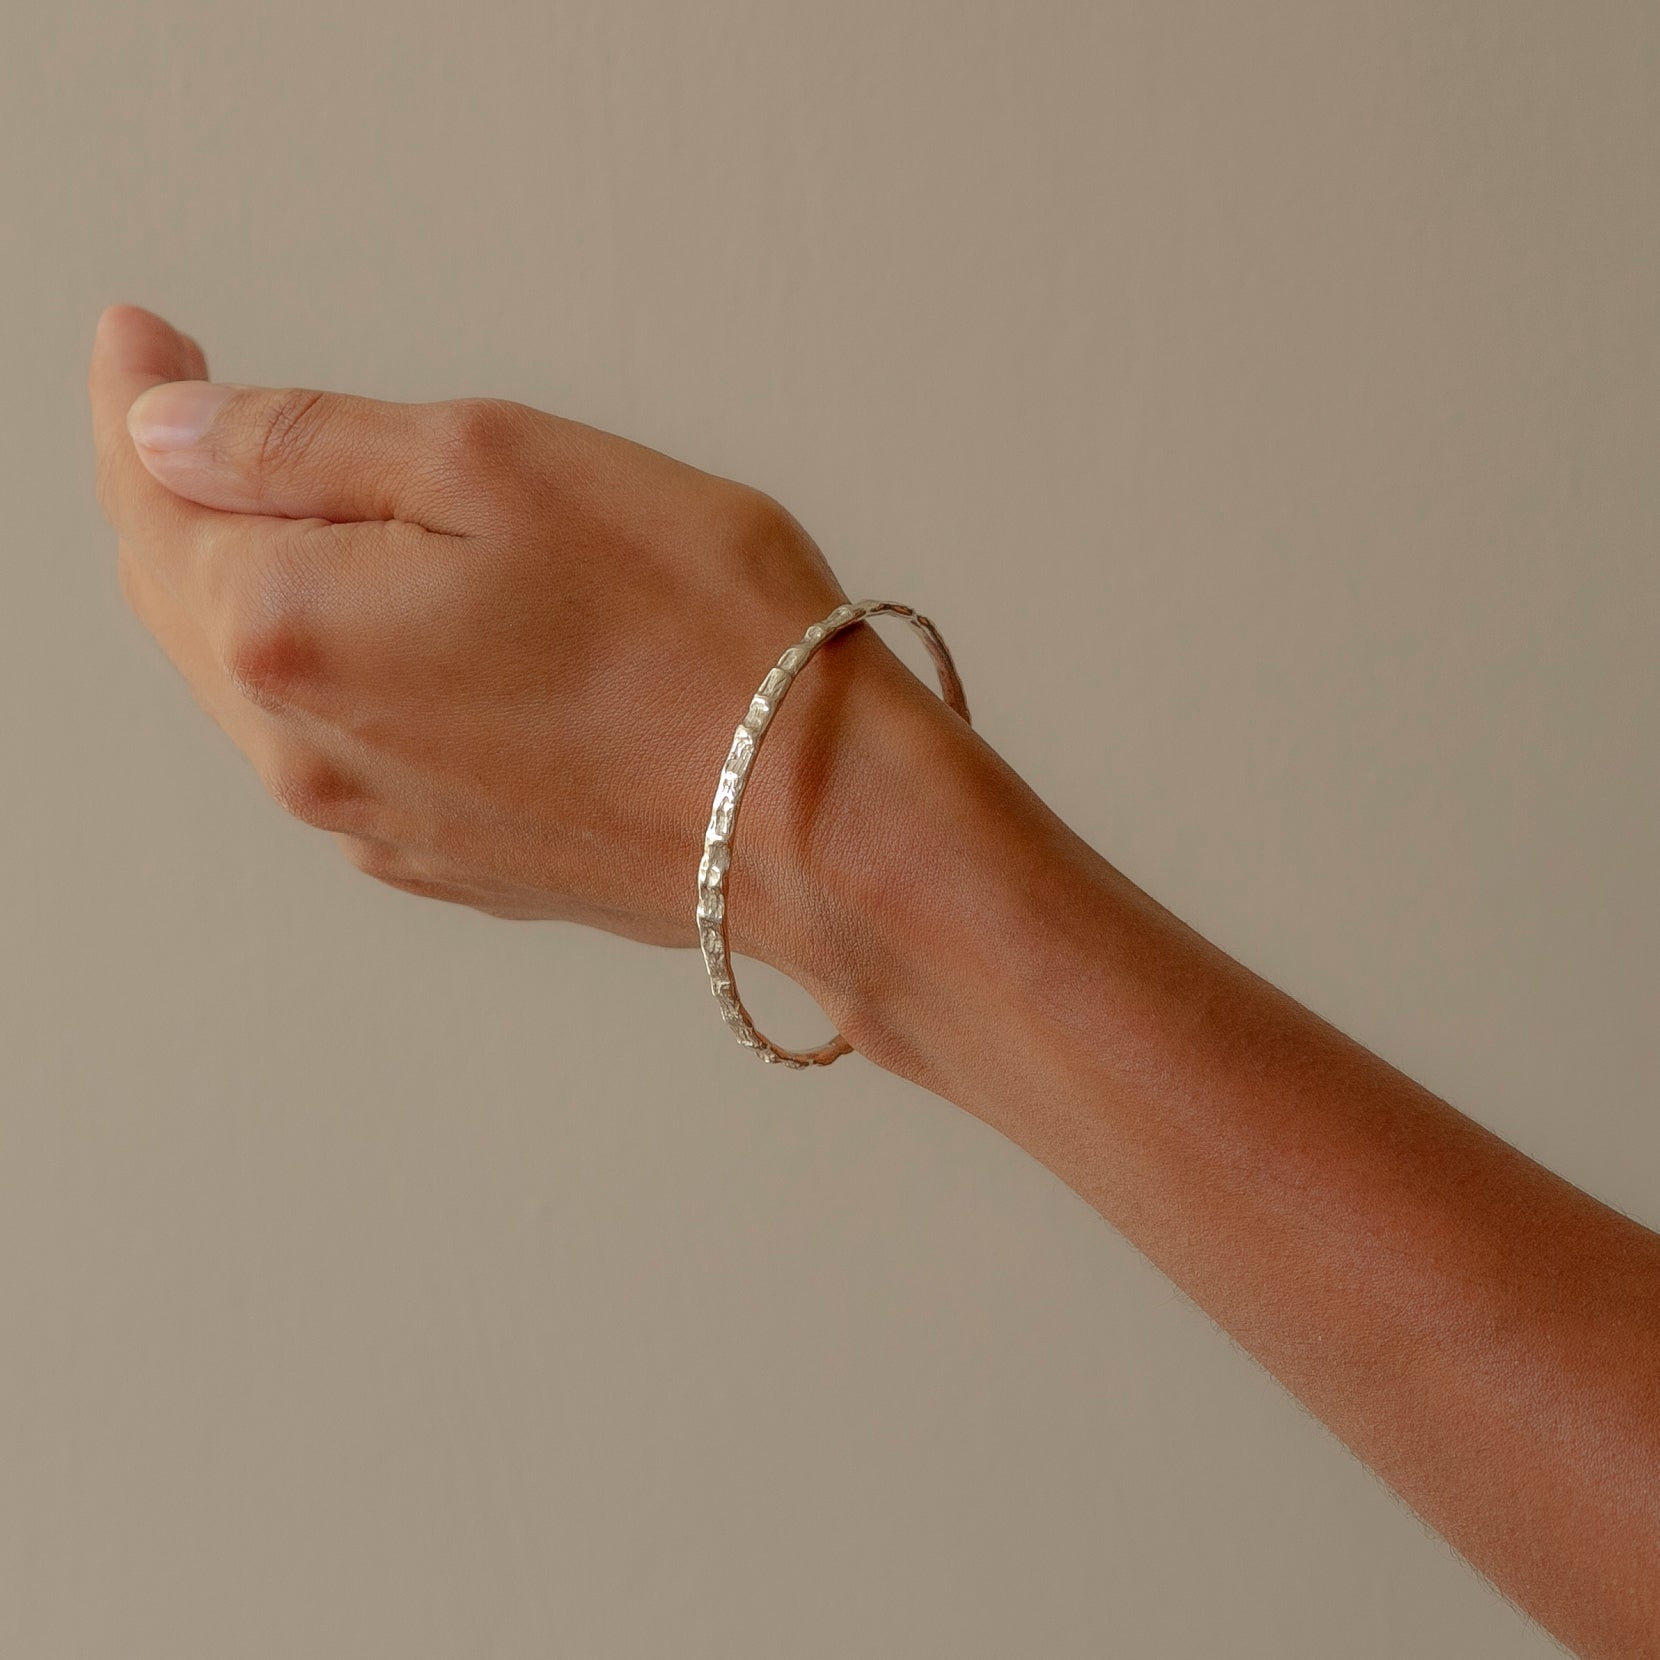 Model wearing a handmade Cockle Bangle in silver